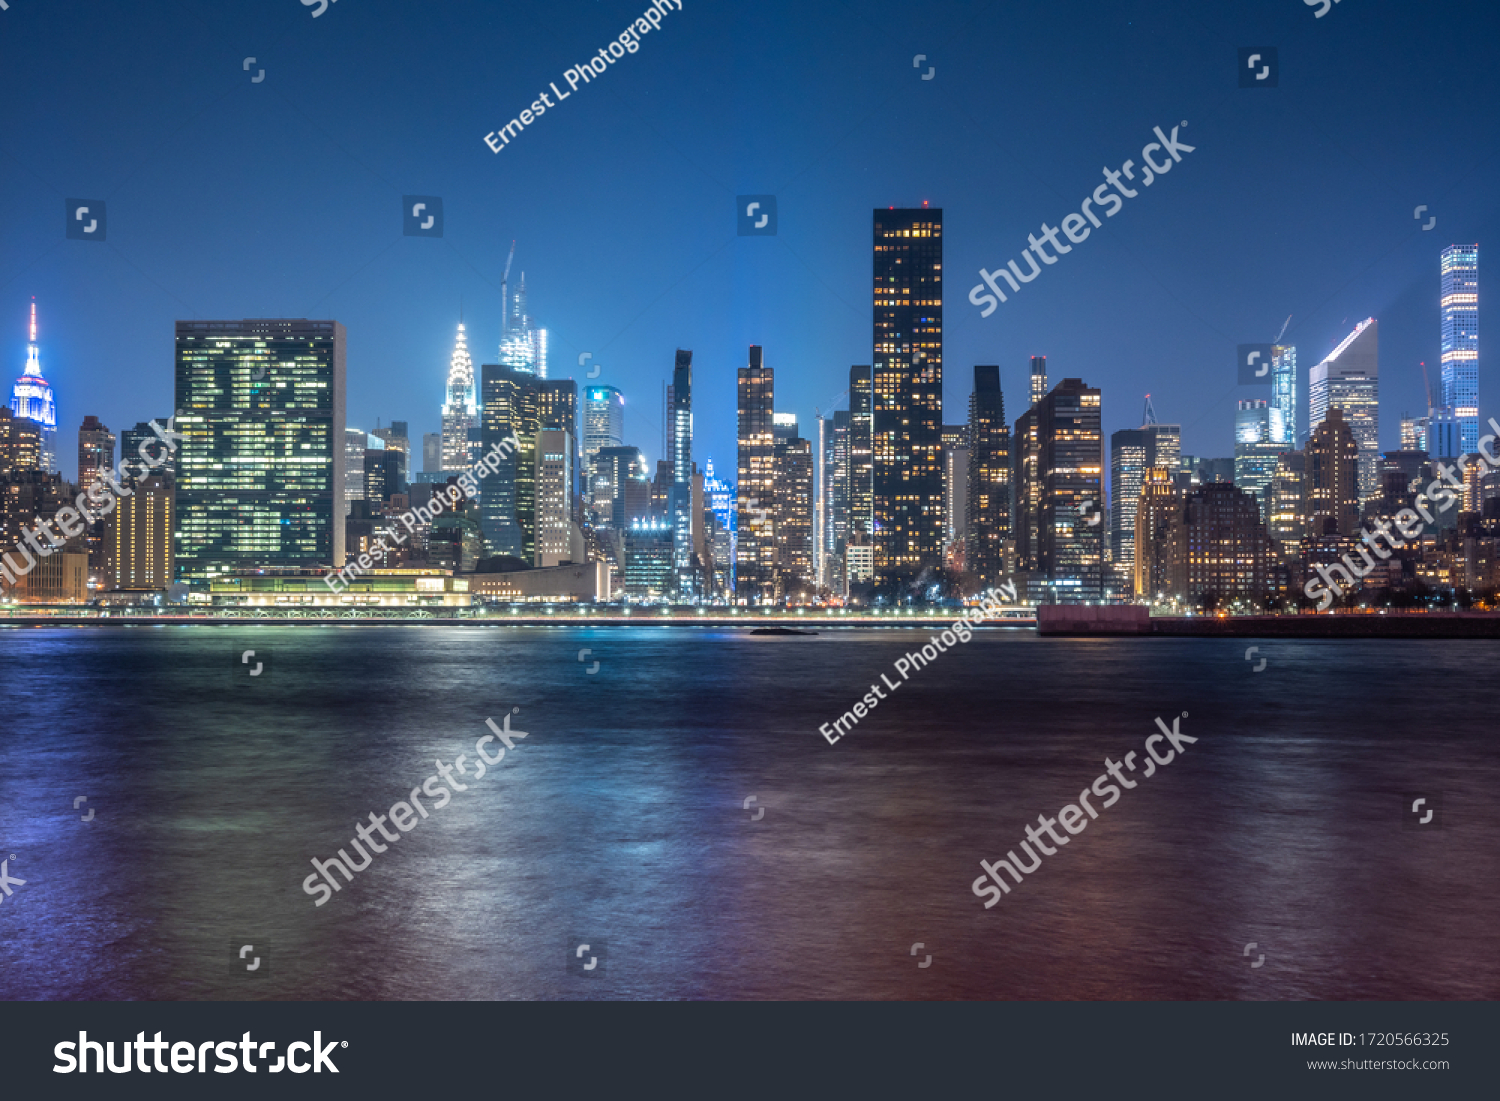 New York City Cityscape during Night Time with busy skyline and dense skyscrapers filling up the sky #1720566325